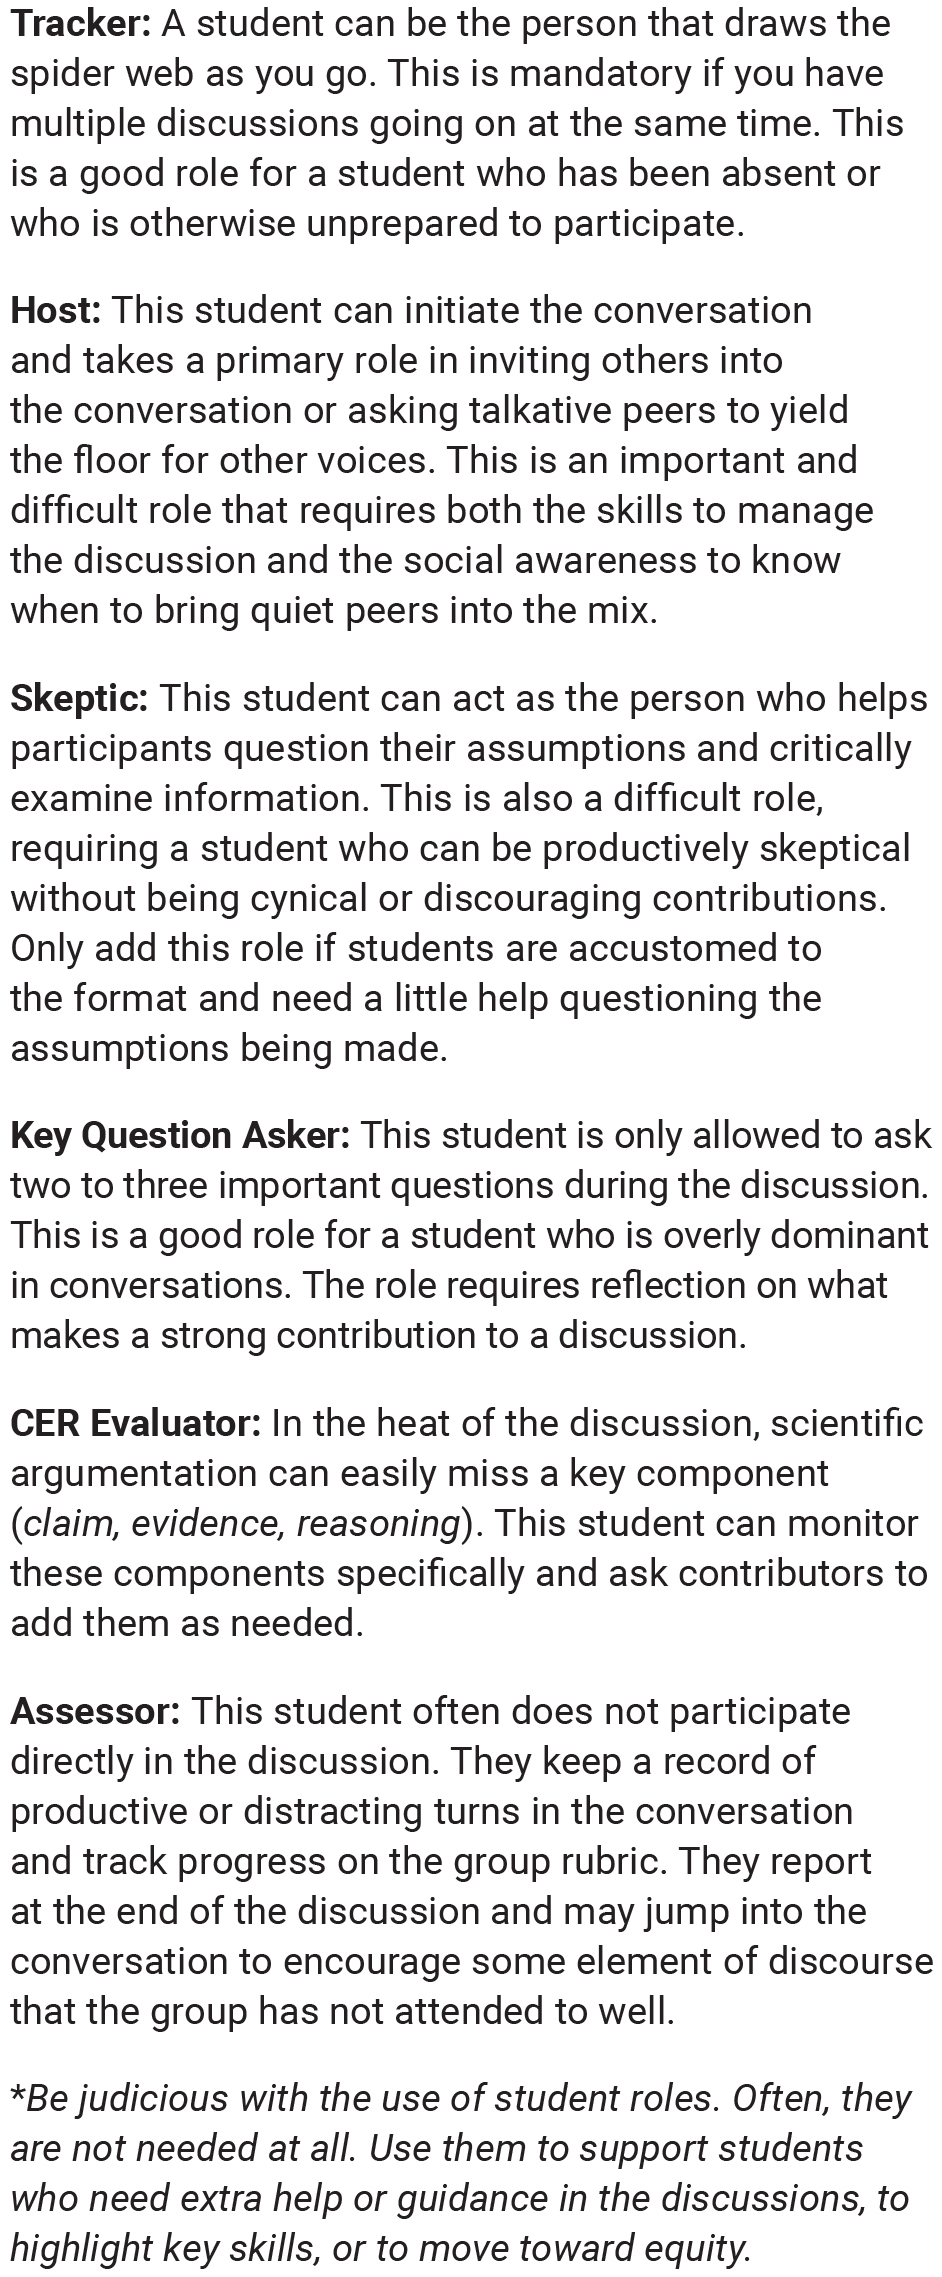 Student roles* that can be assigned for the discussions.